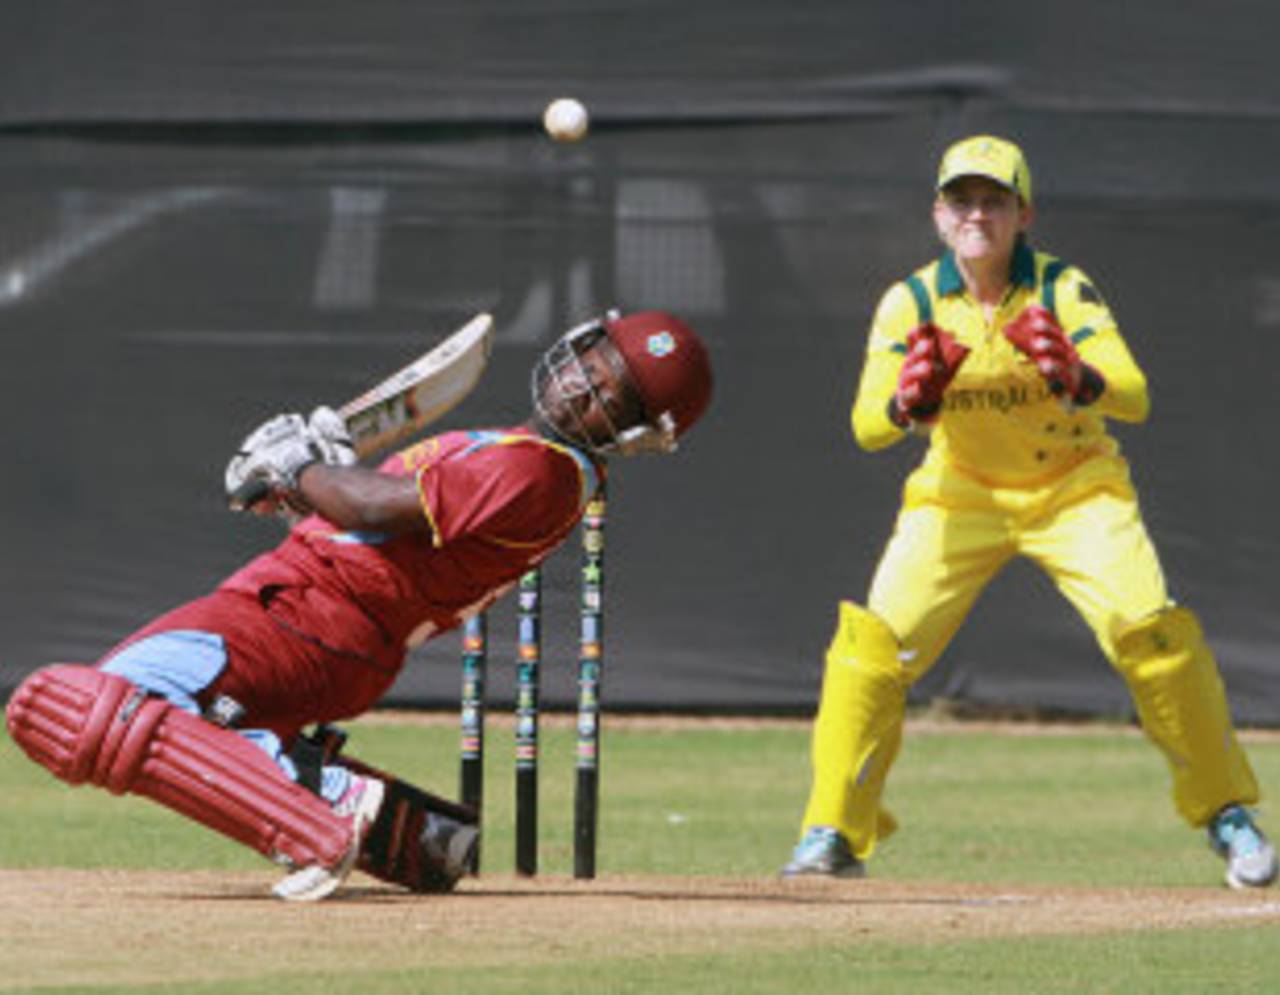 Deandra Dottin is one of the West Indies batsmen India will need to be wary of&nbsp;&nbsp;&bull;&nbsp;&nbsp;ICC/Solaris Images